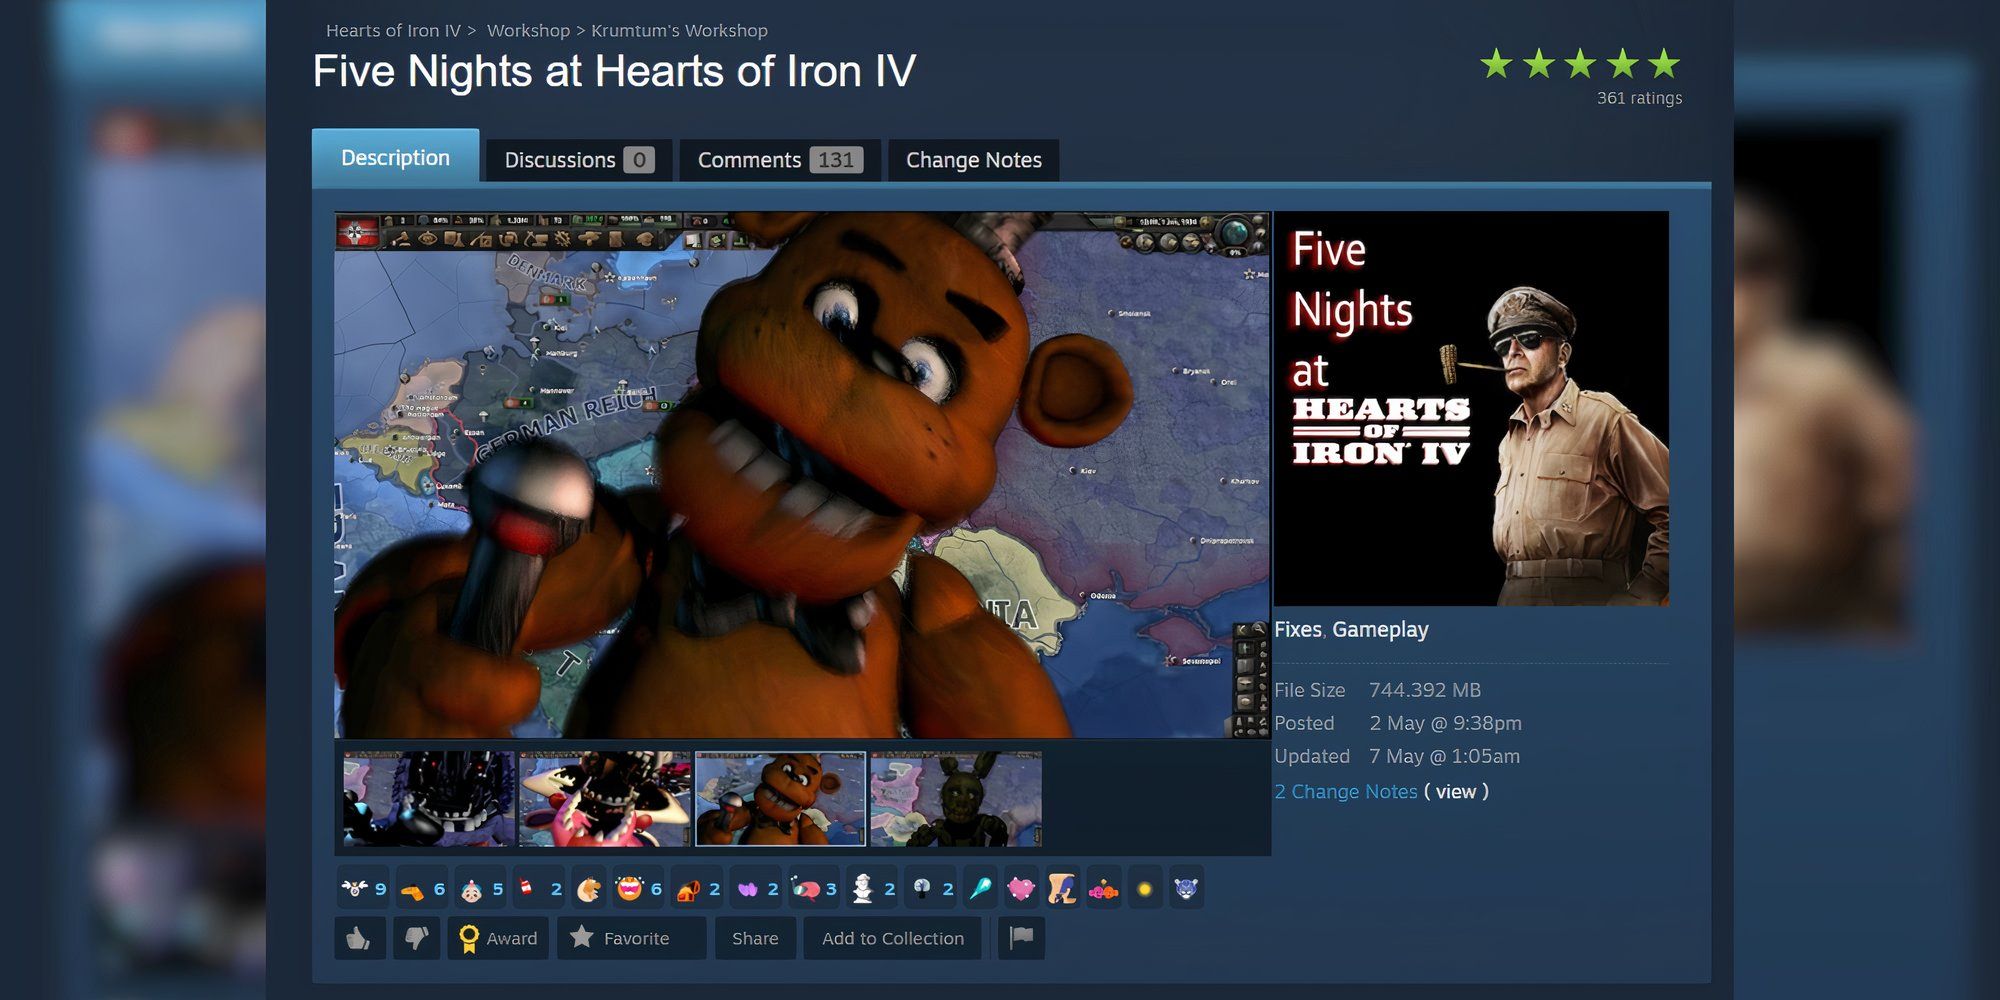 Screenshot showing the Steam page for the Five Nights at Hearts of Iron IV mod page.